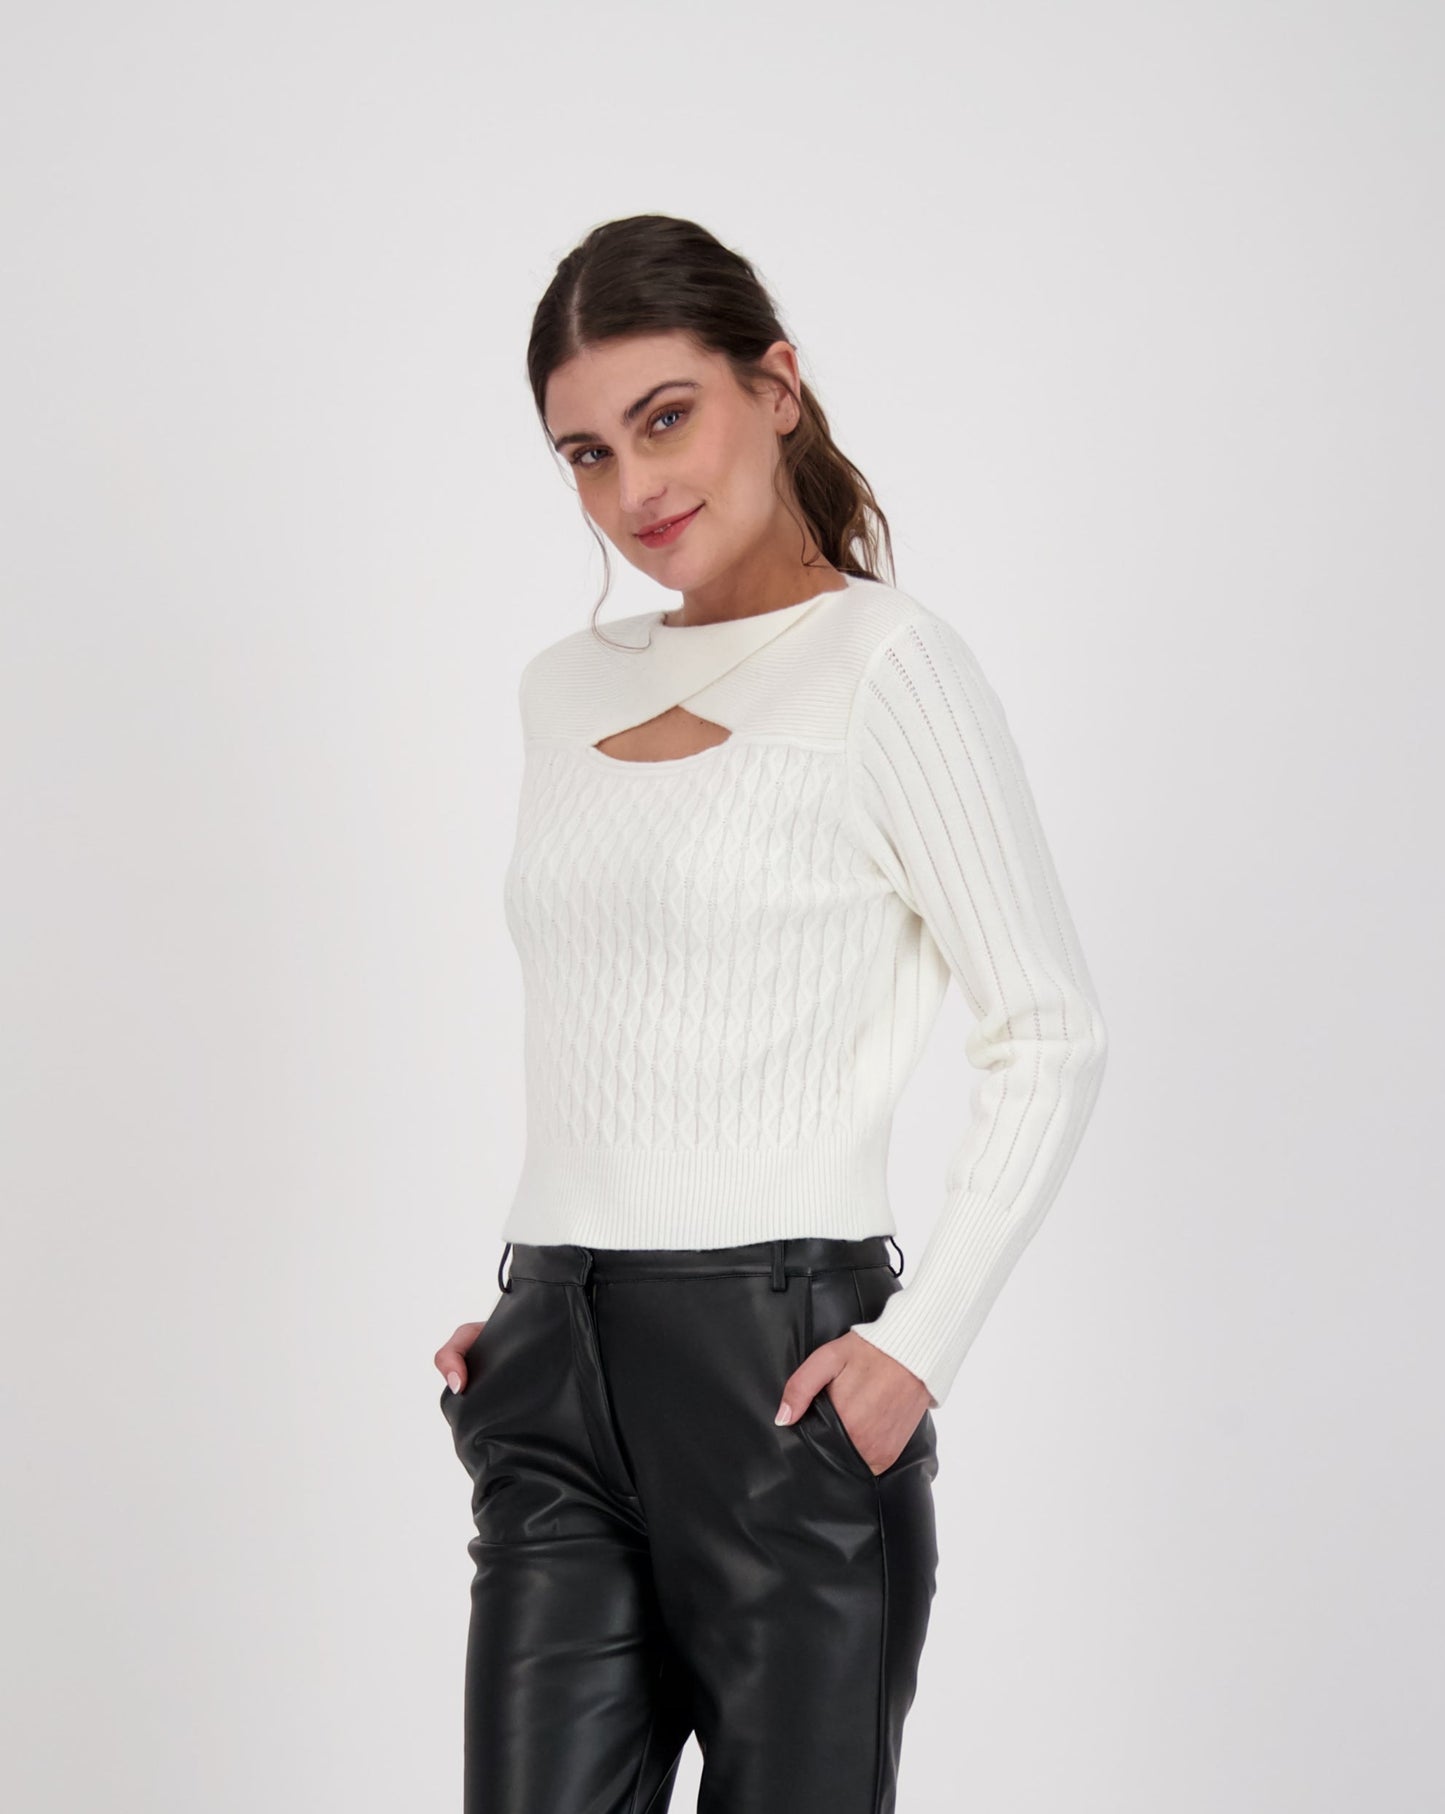 Cut Out High Neck Sweater Top